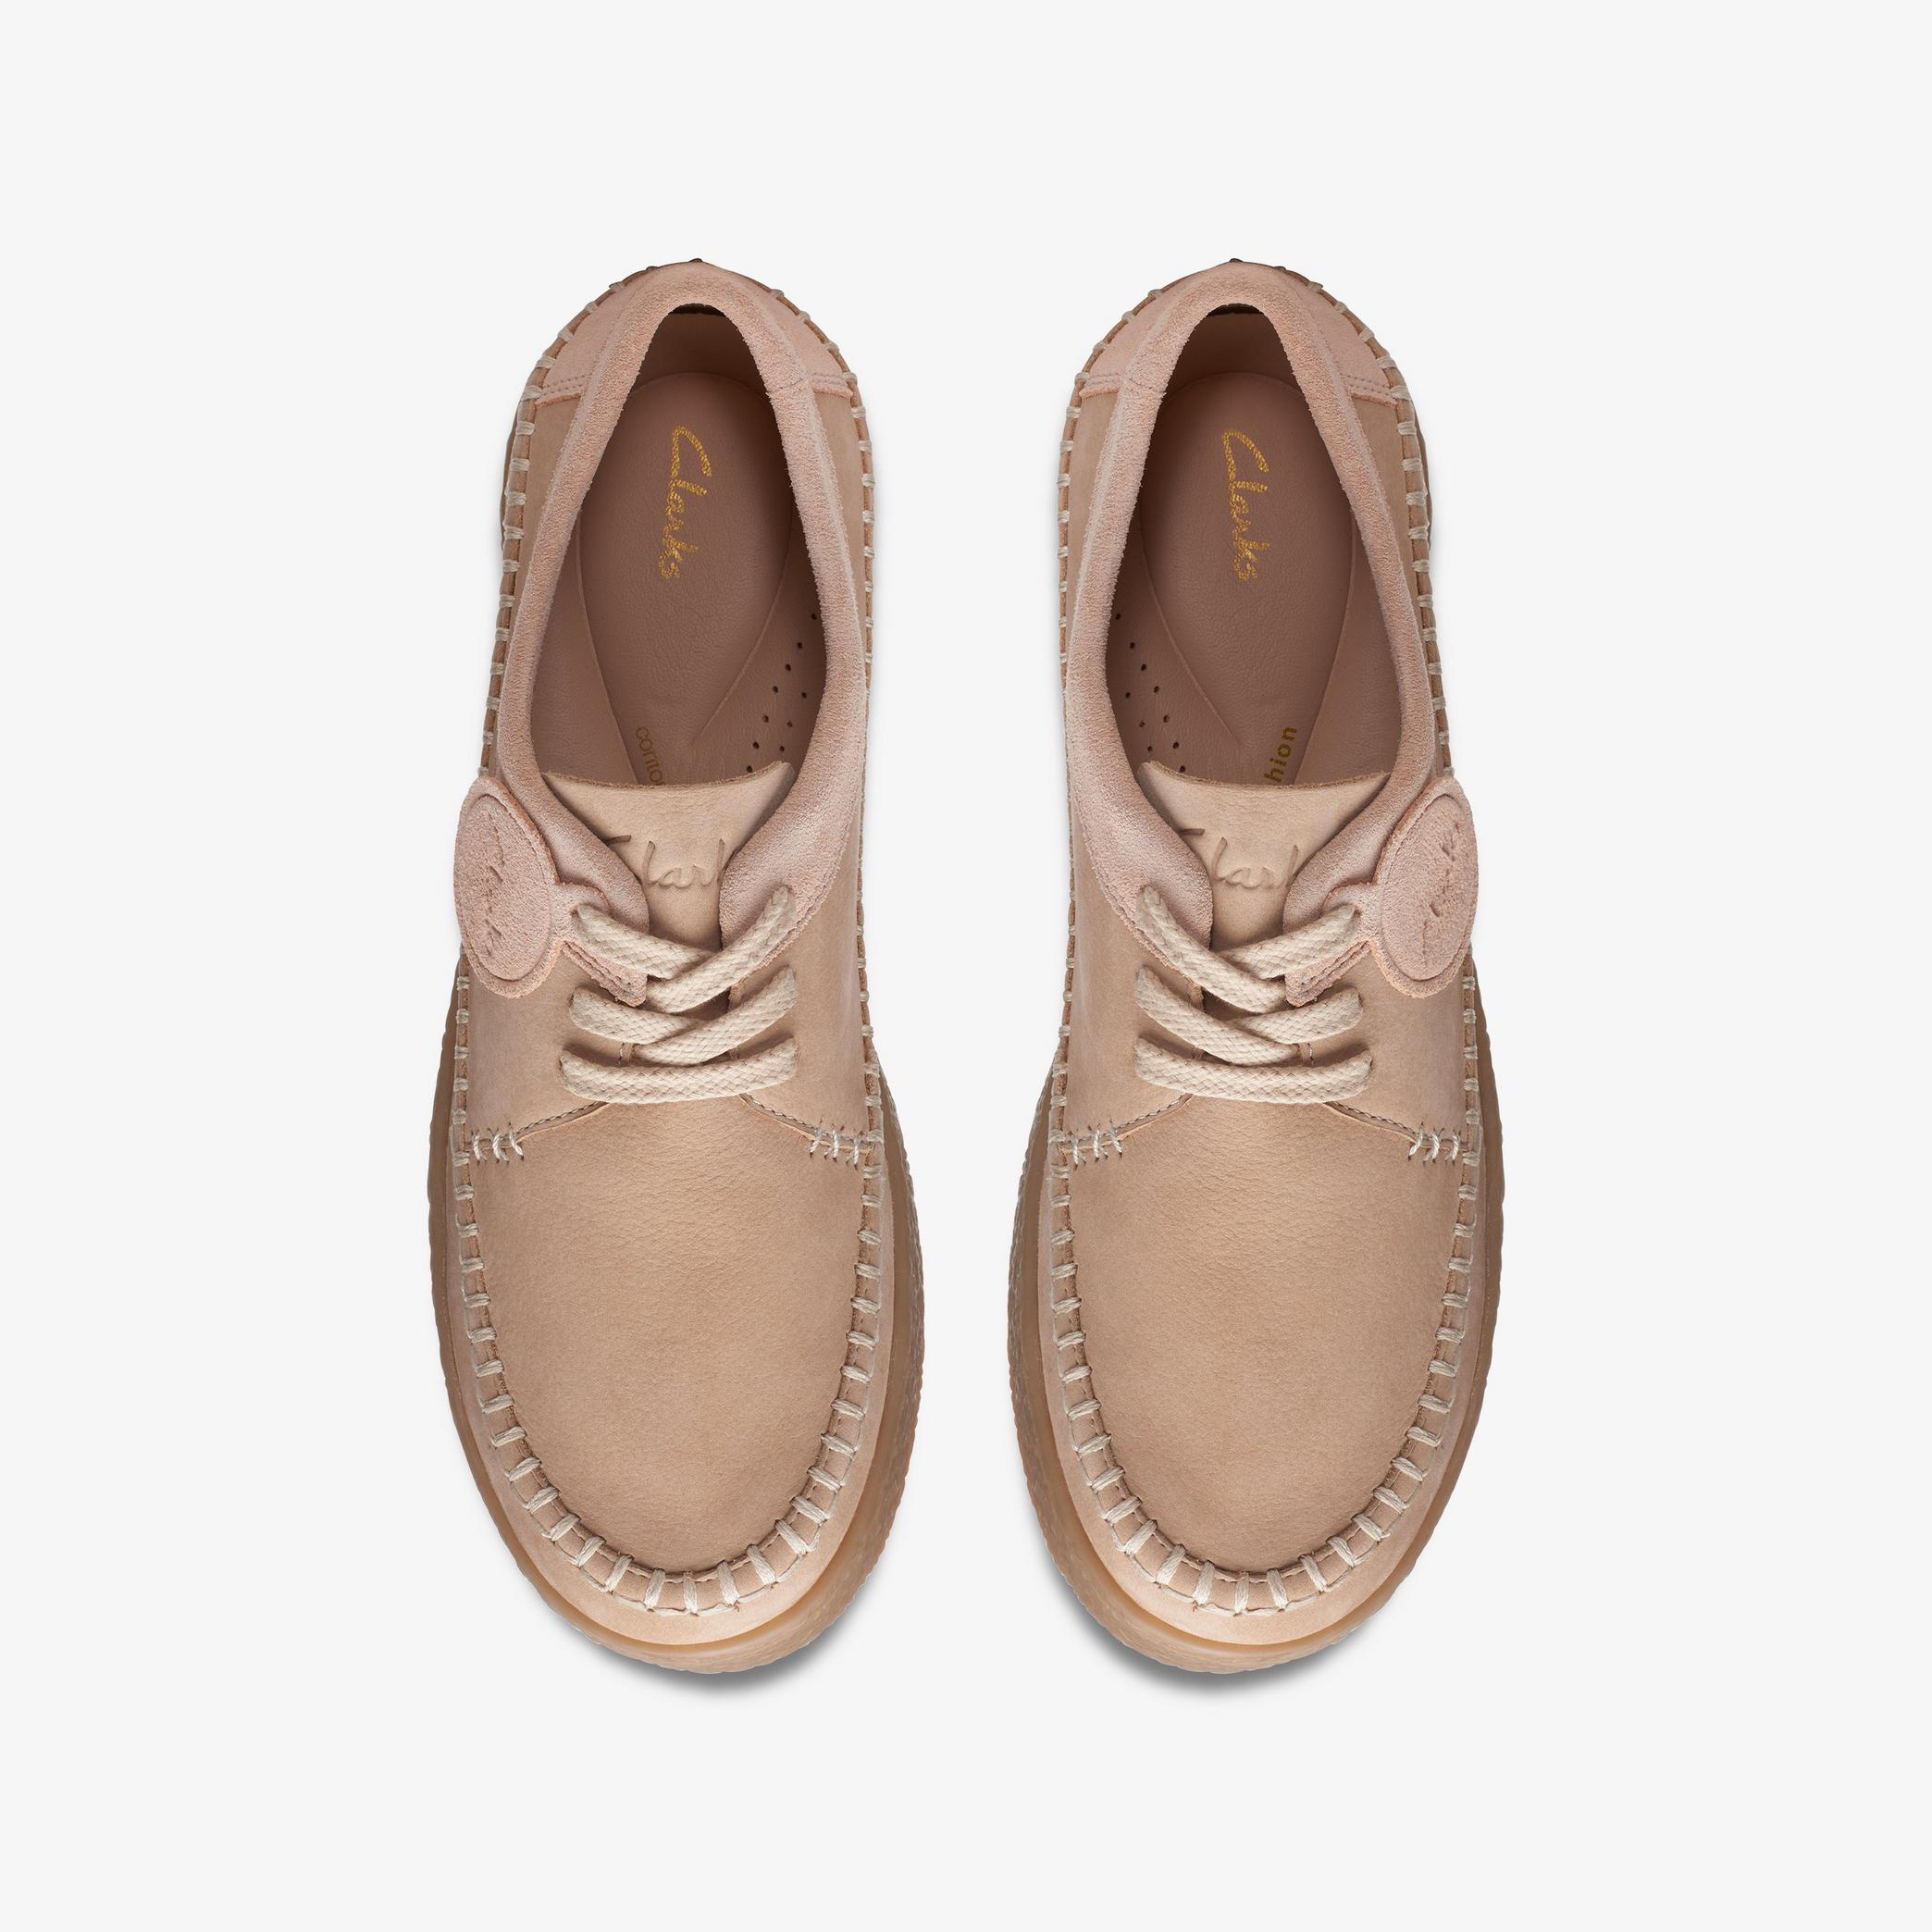 Womens Barleigh Weave Light Sand Comb Shoes | Clarks Outlet